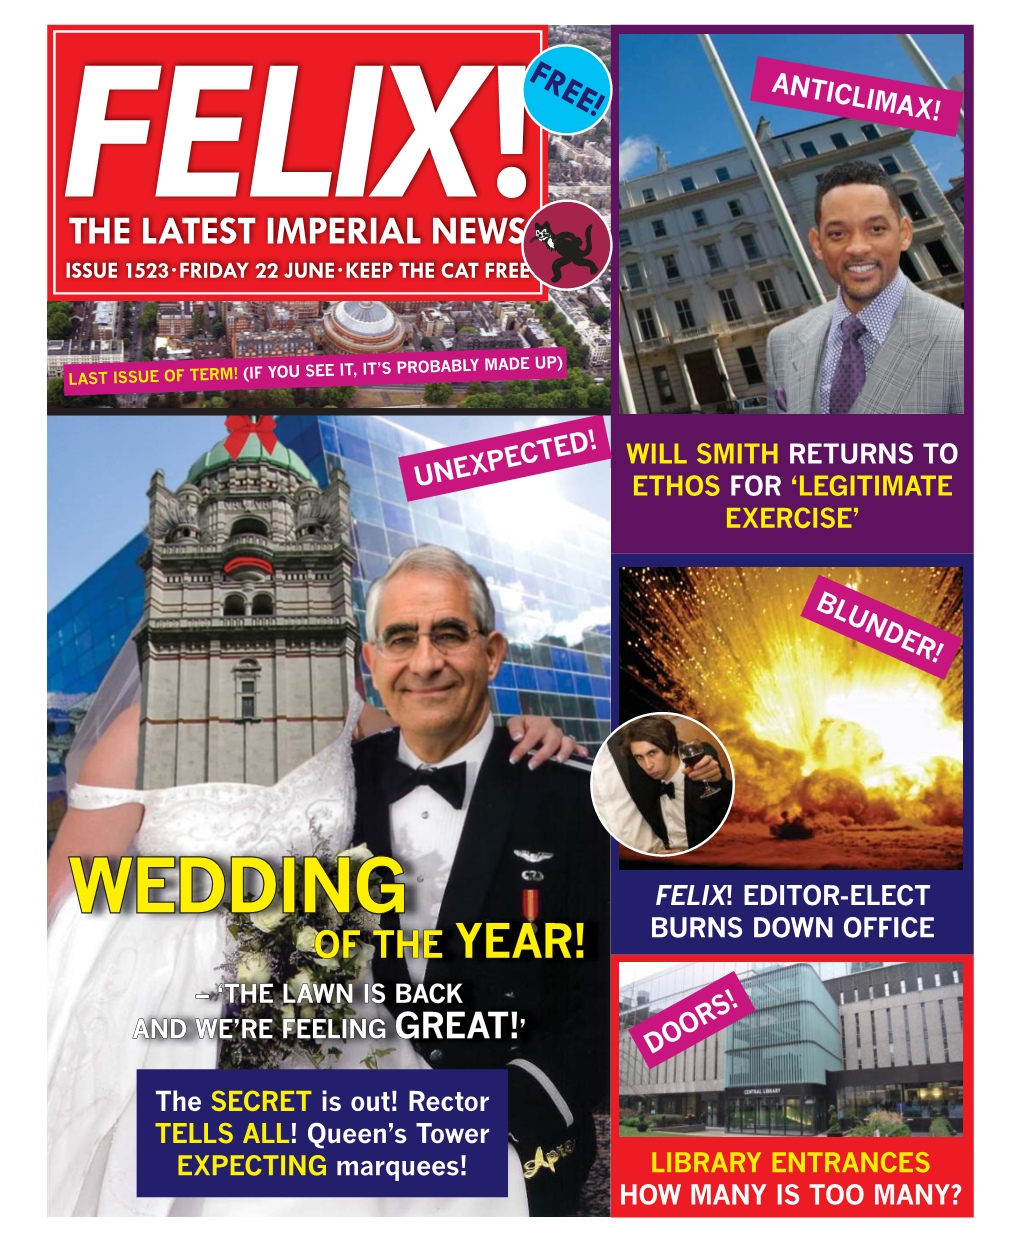 Felix!Free! Anticlimax! the Latest Imperial News Issue 1523•Friday 22 June•Keep the Cat Free